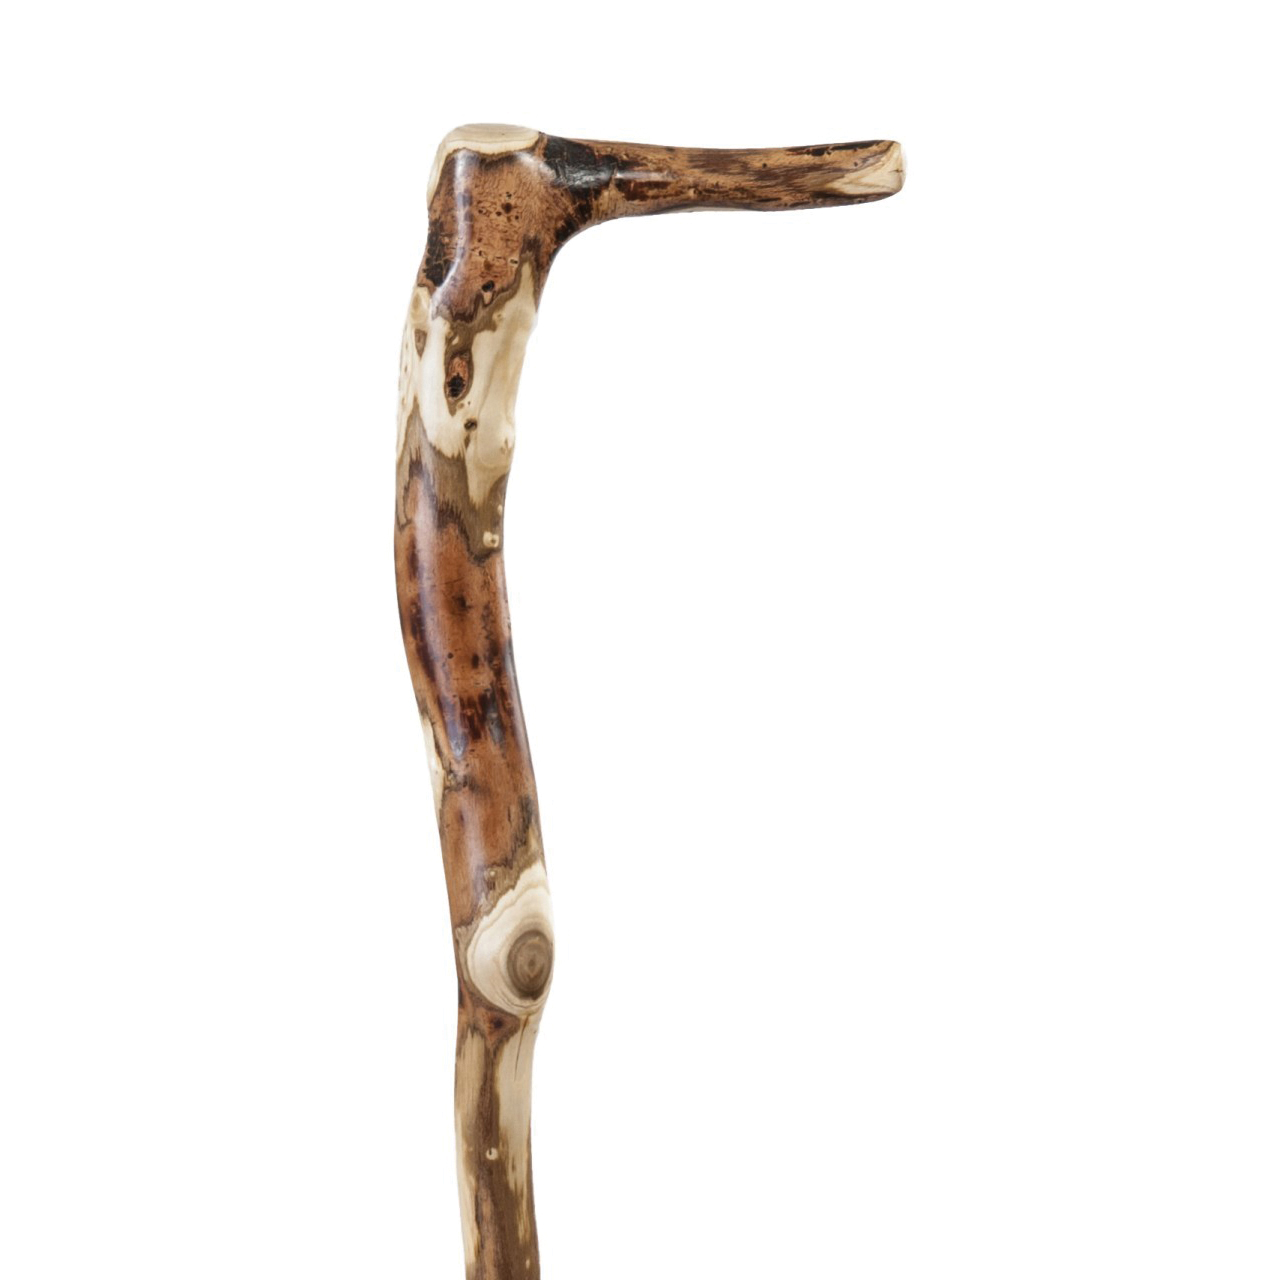 Brazos 502-3000-0138 Rustic Root Cane, 37 in H Cane, Standard Handle, Wood Handle, Hardwood, Root, Lacquer - 2